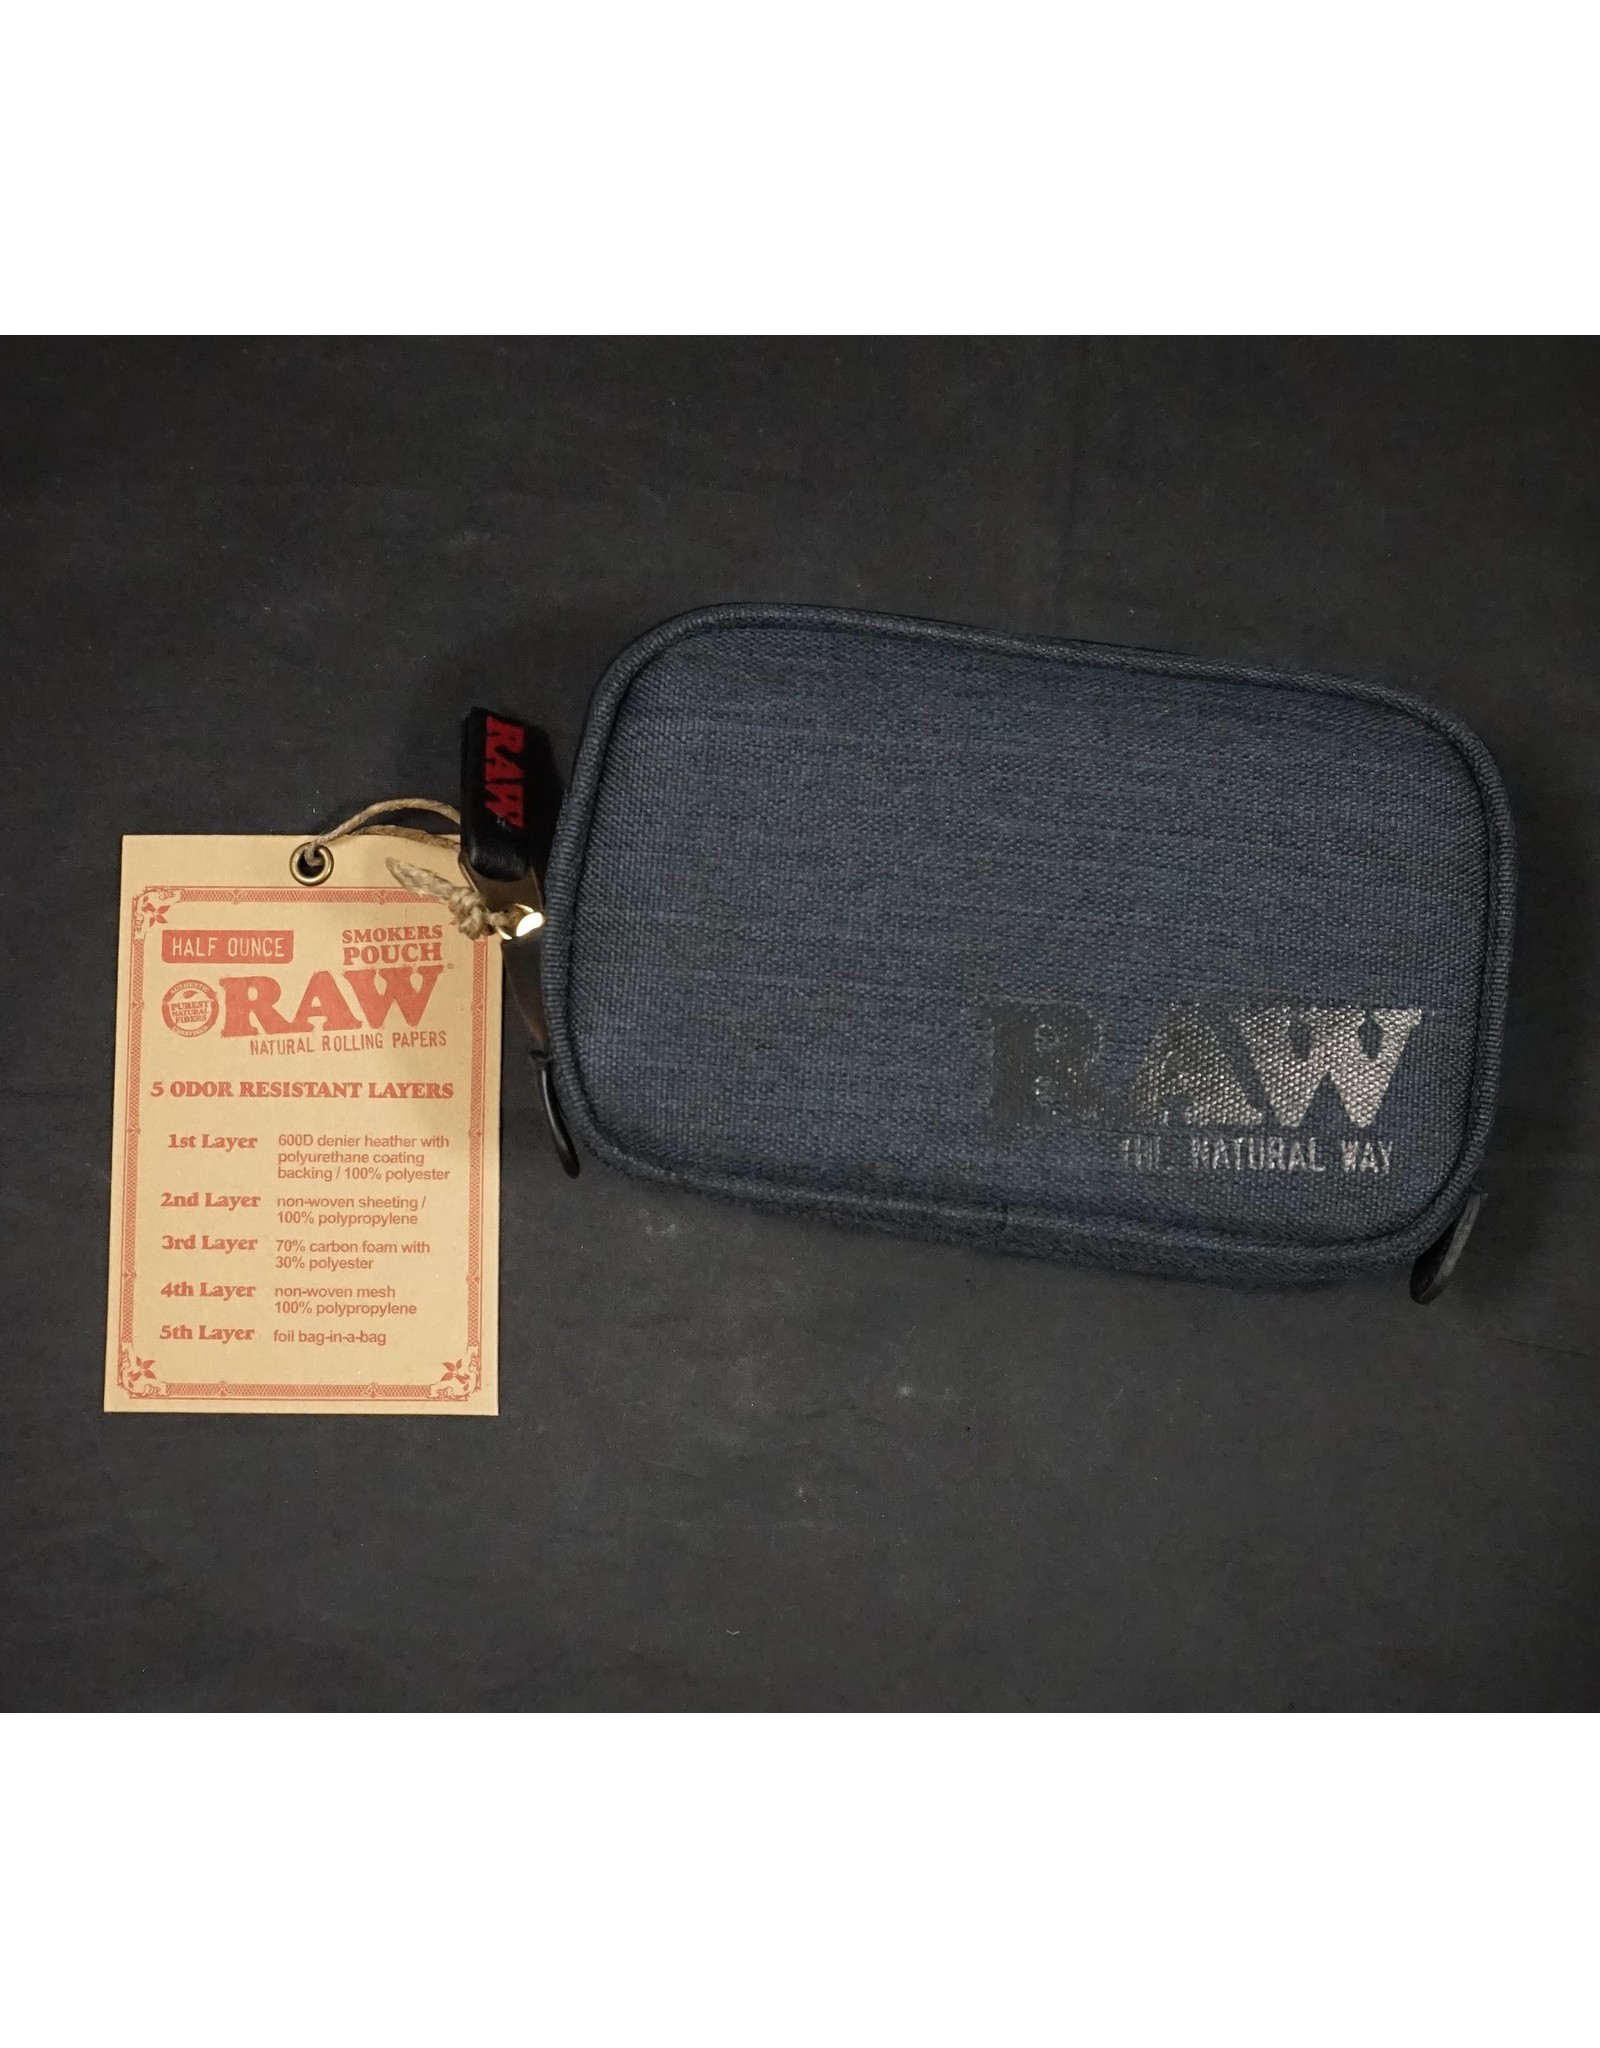 Raw Black Smell Proof Smokers Pouch - Small (Half Ounce)